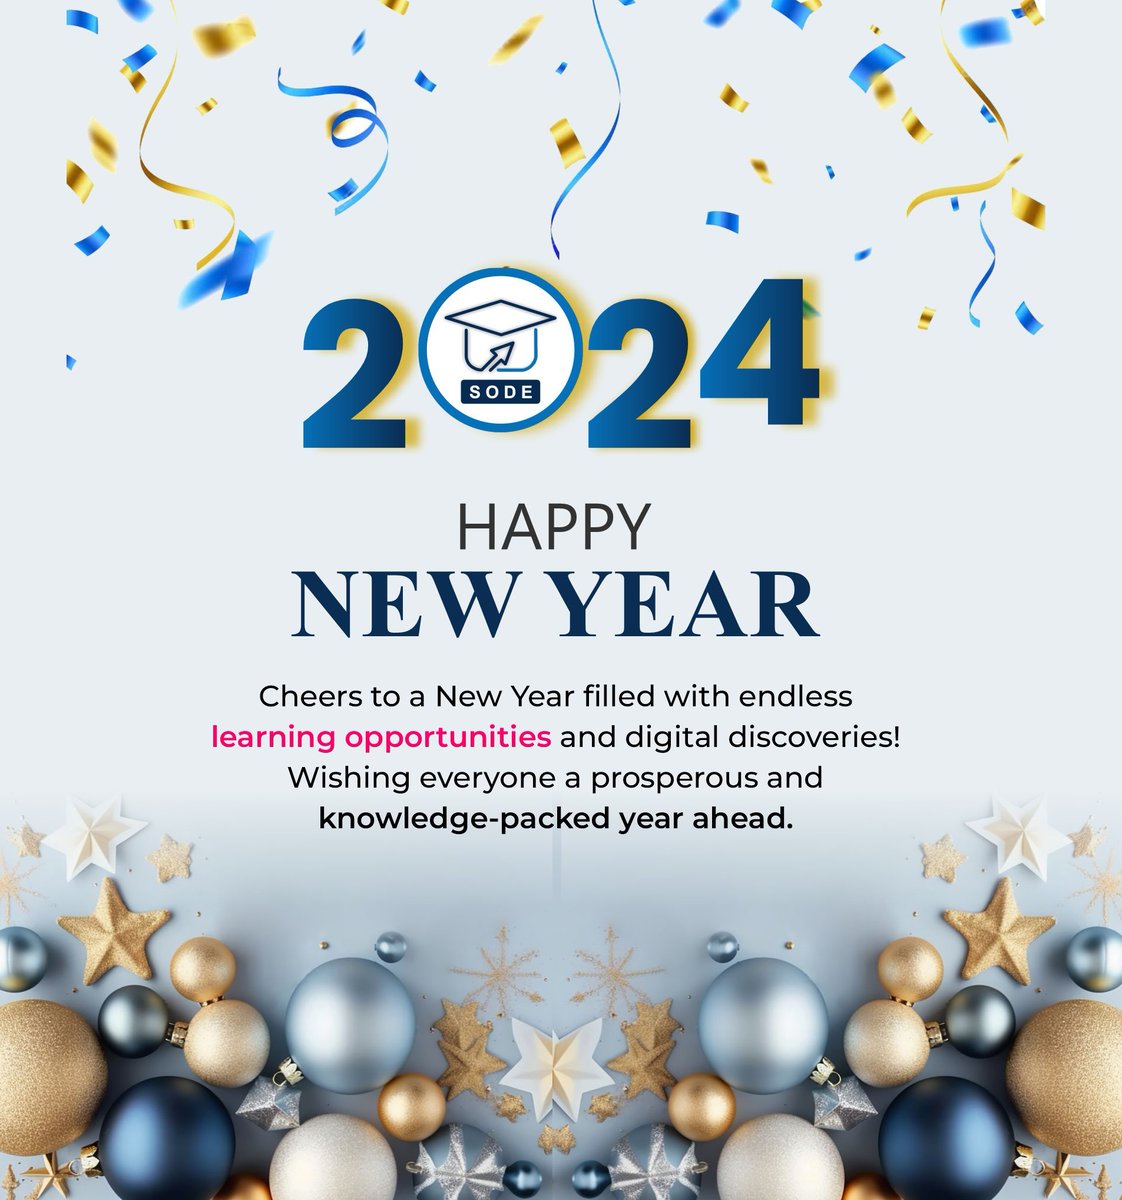 New Year, new opportunities to learn online! Wishing you a year filled with educational adventures and growth. . #OnlineLearning #CourseSelection #EducationGoals #OnlineEducation #eLearning #DistanceLearning #DigitalLearning #EdTech #SkillsForSuccess #happynewyear #newyear #2024